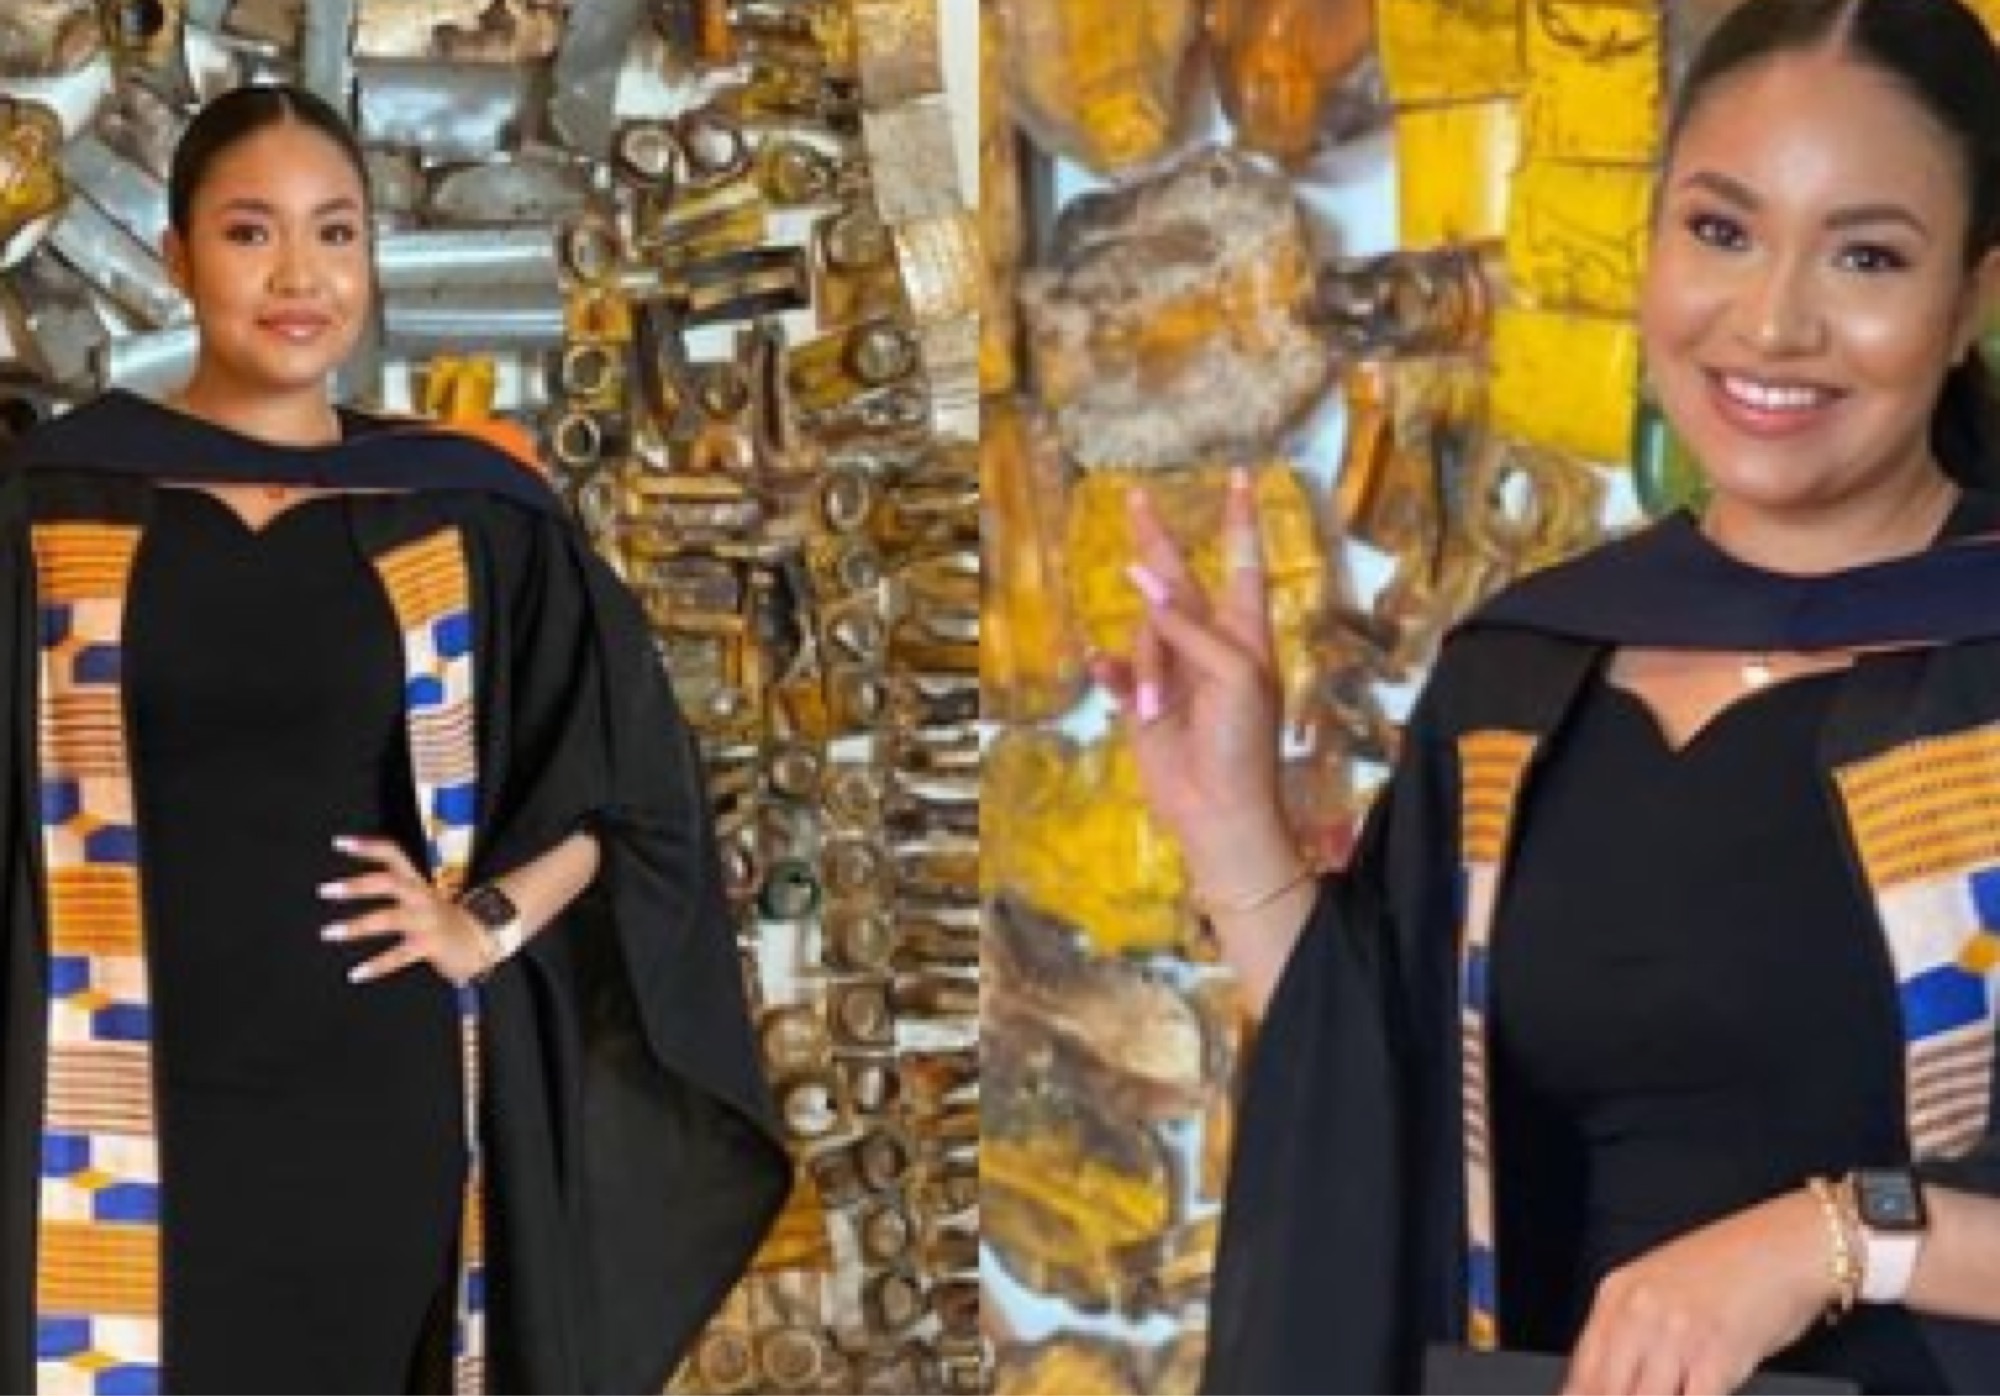 Flavor’s Second Babymama, Anna Banner Bags Degree From Ghanaian University